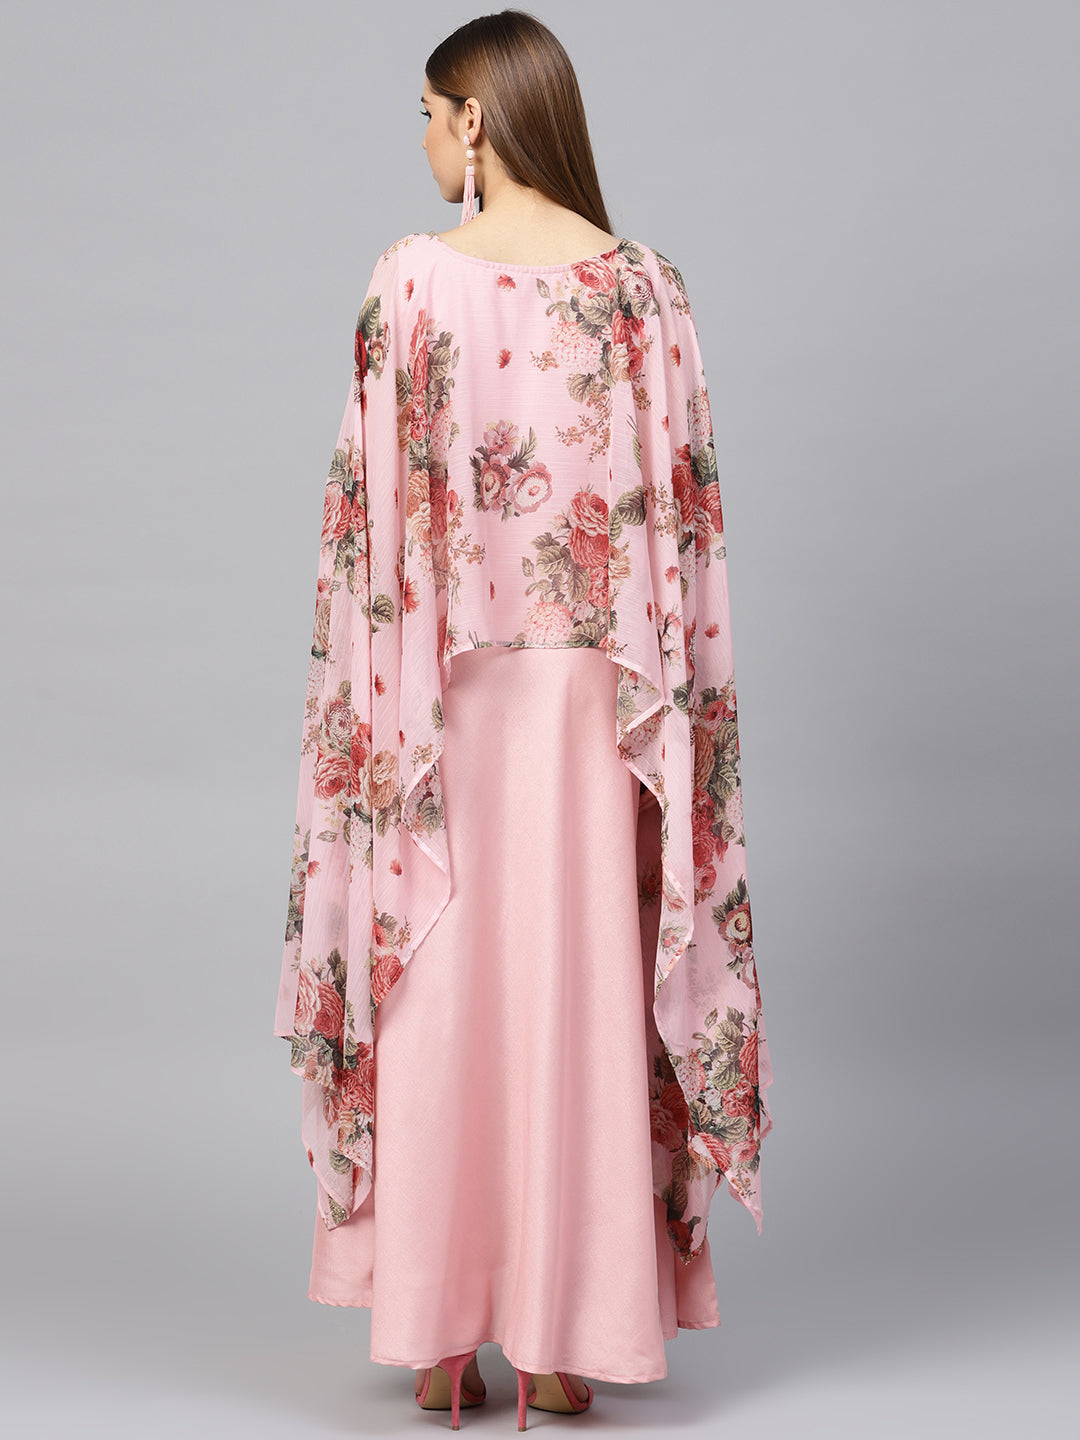 Ahalyaa Women Pink Floral A Line Fusion Dresses